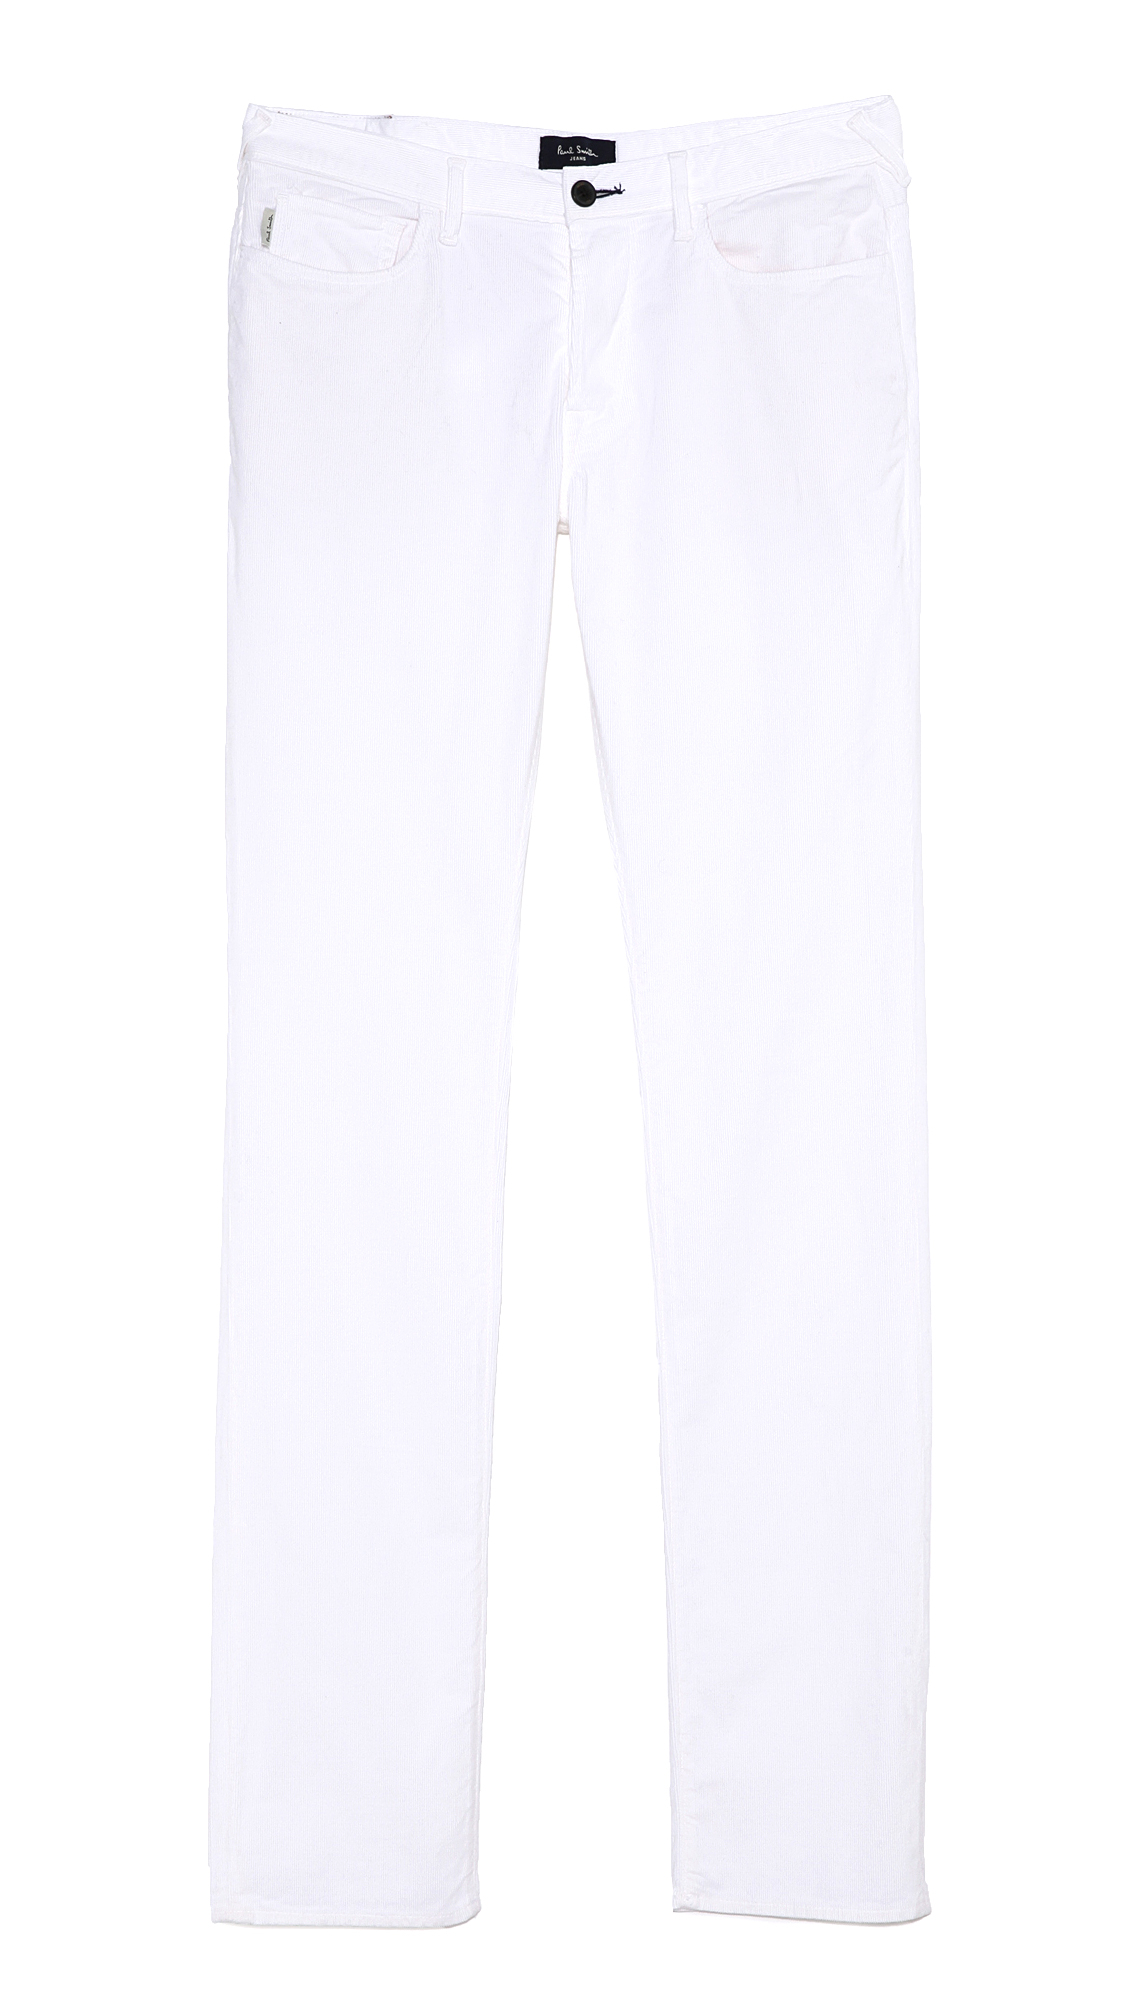 Paul Smith Drain-Pipe Light-Weight Corduroy Pants in White for Men - Lyst